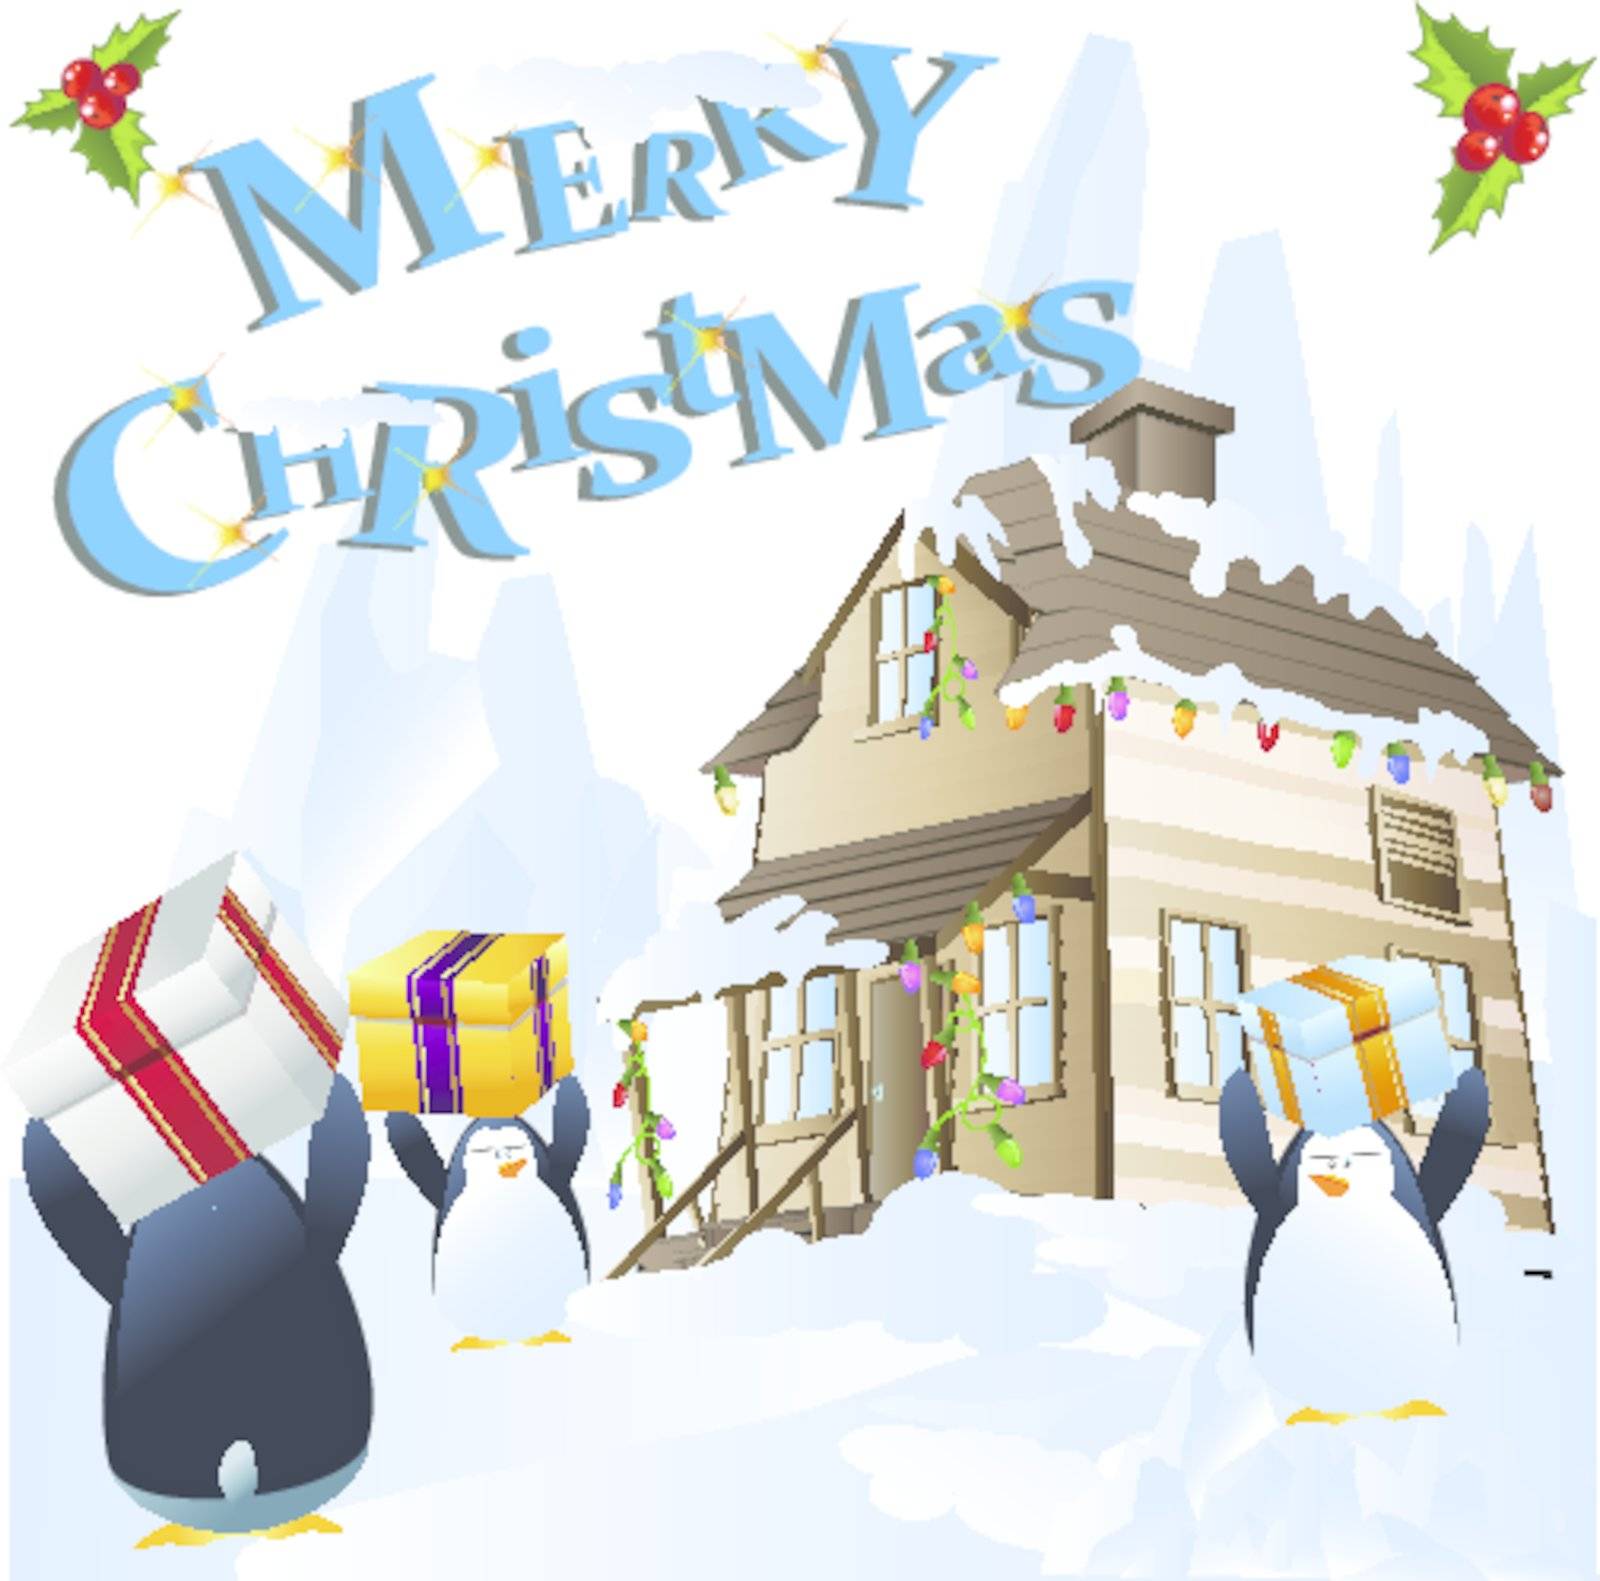 Clip-art of cute penguins on snow holding Christmas gifts